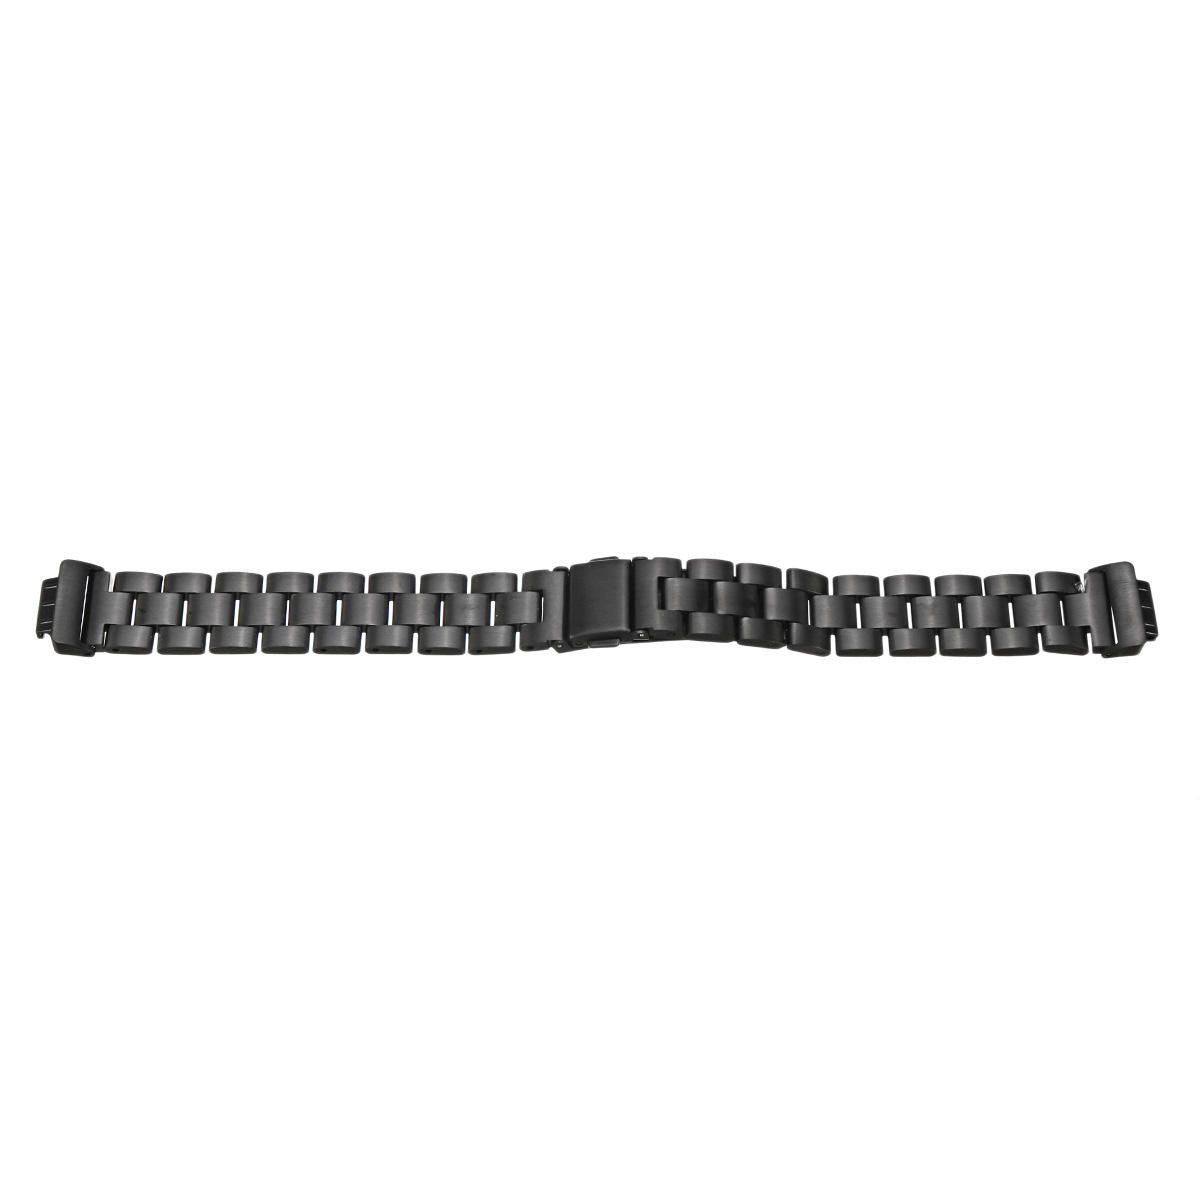 Stainless Steel Watch Band Strap Replacement for Fitbit Inspire / Inspire HR